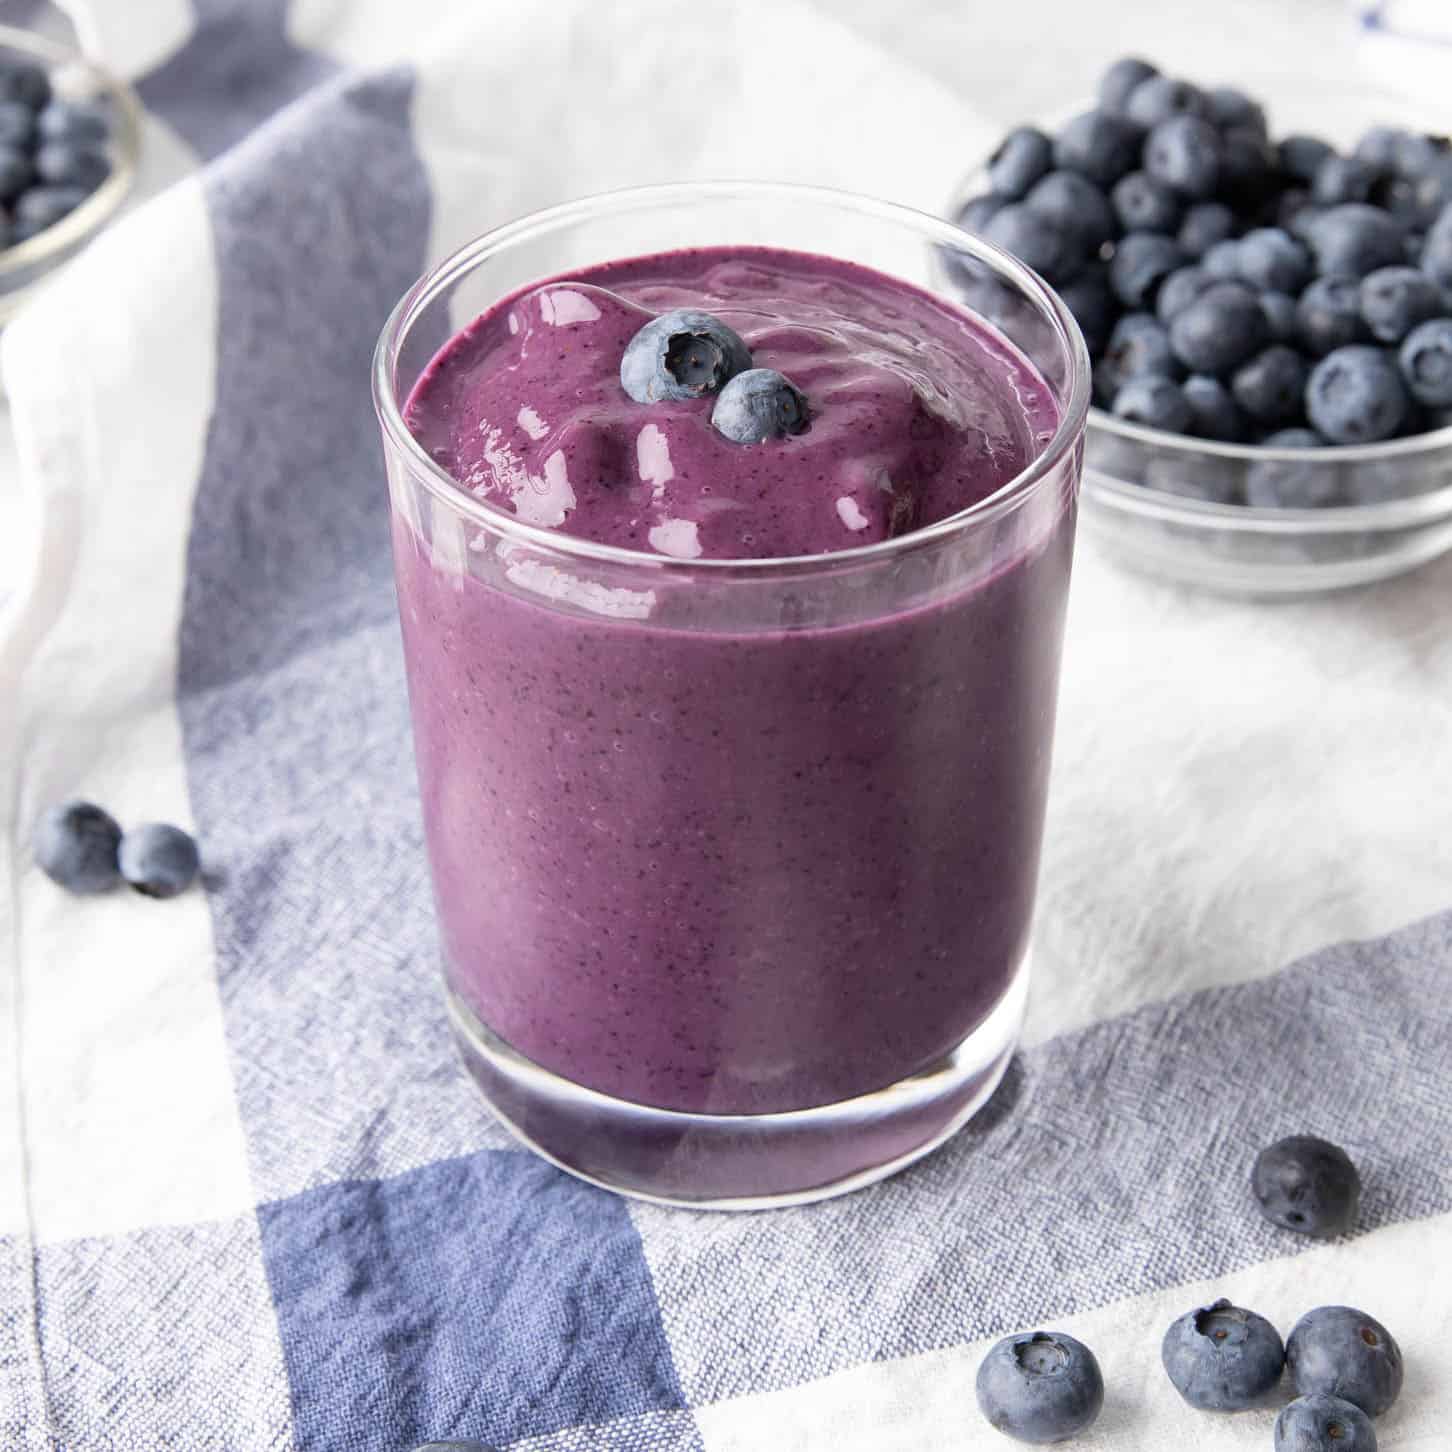 Blueberry Smoothie – 3 Ingredients!